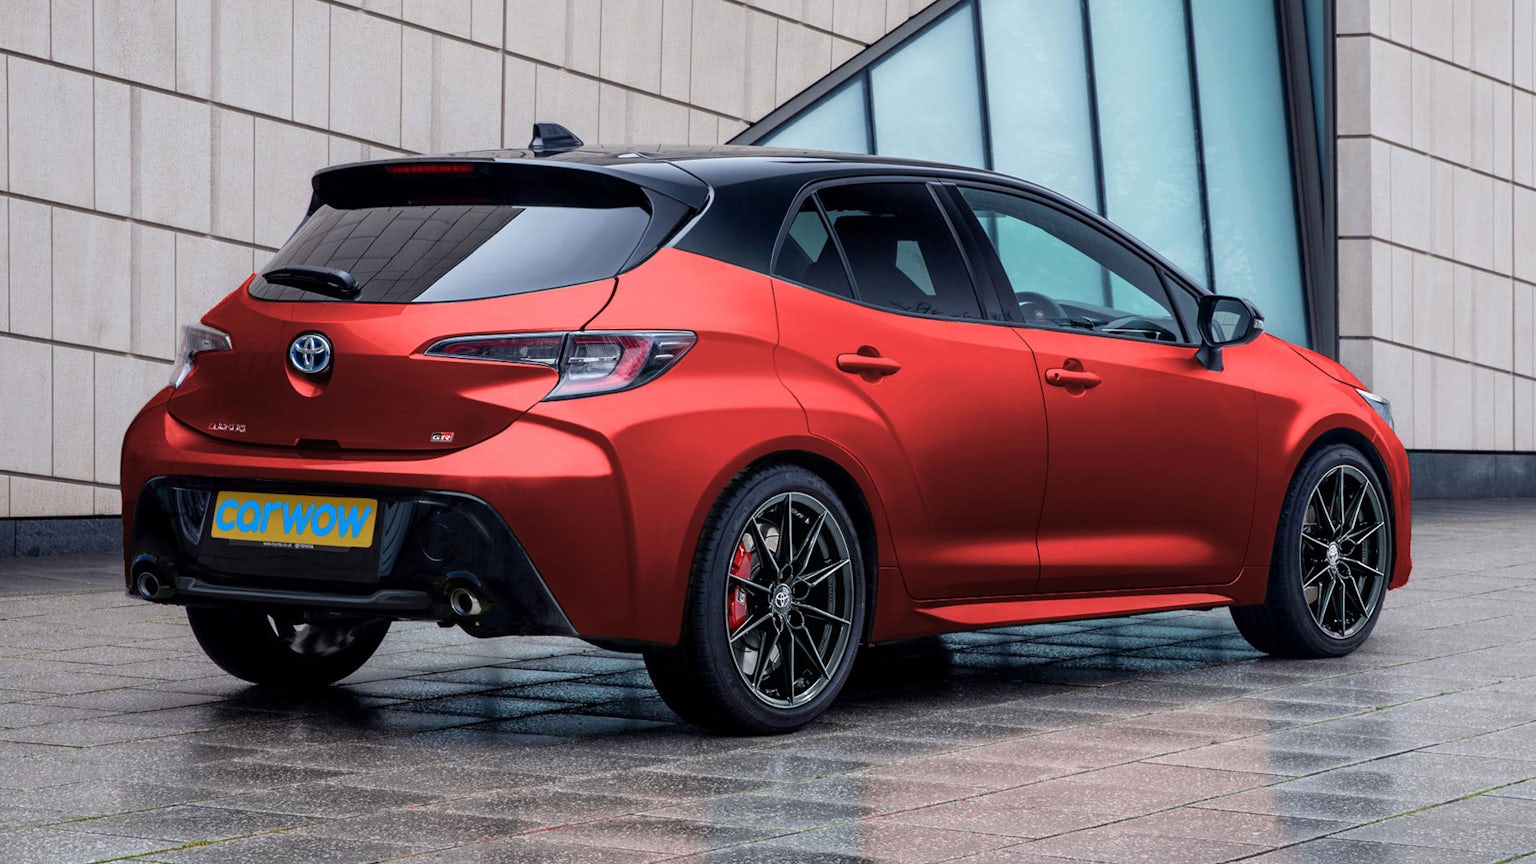 New Toyota GR Corolla hot hatch rendered price, specs and release date